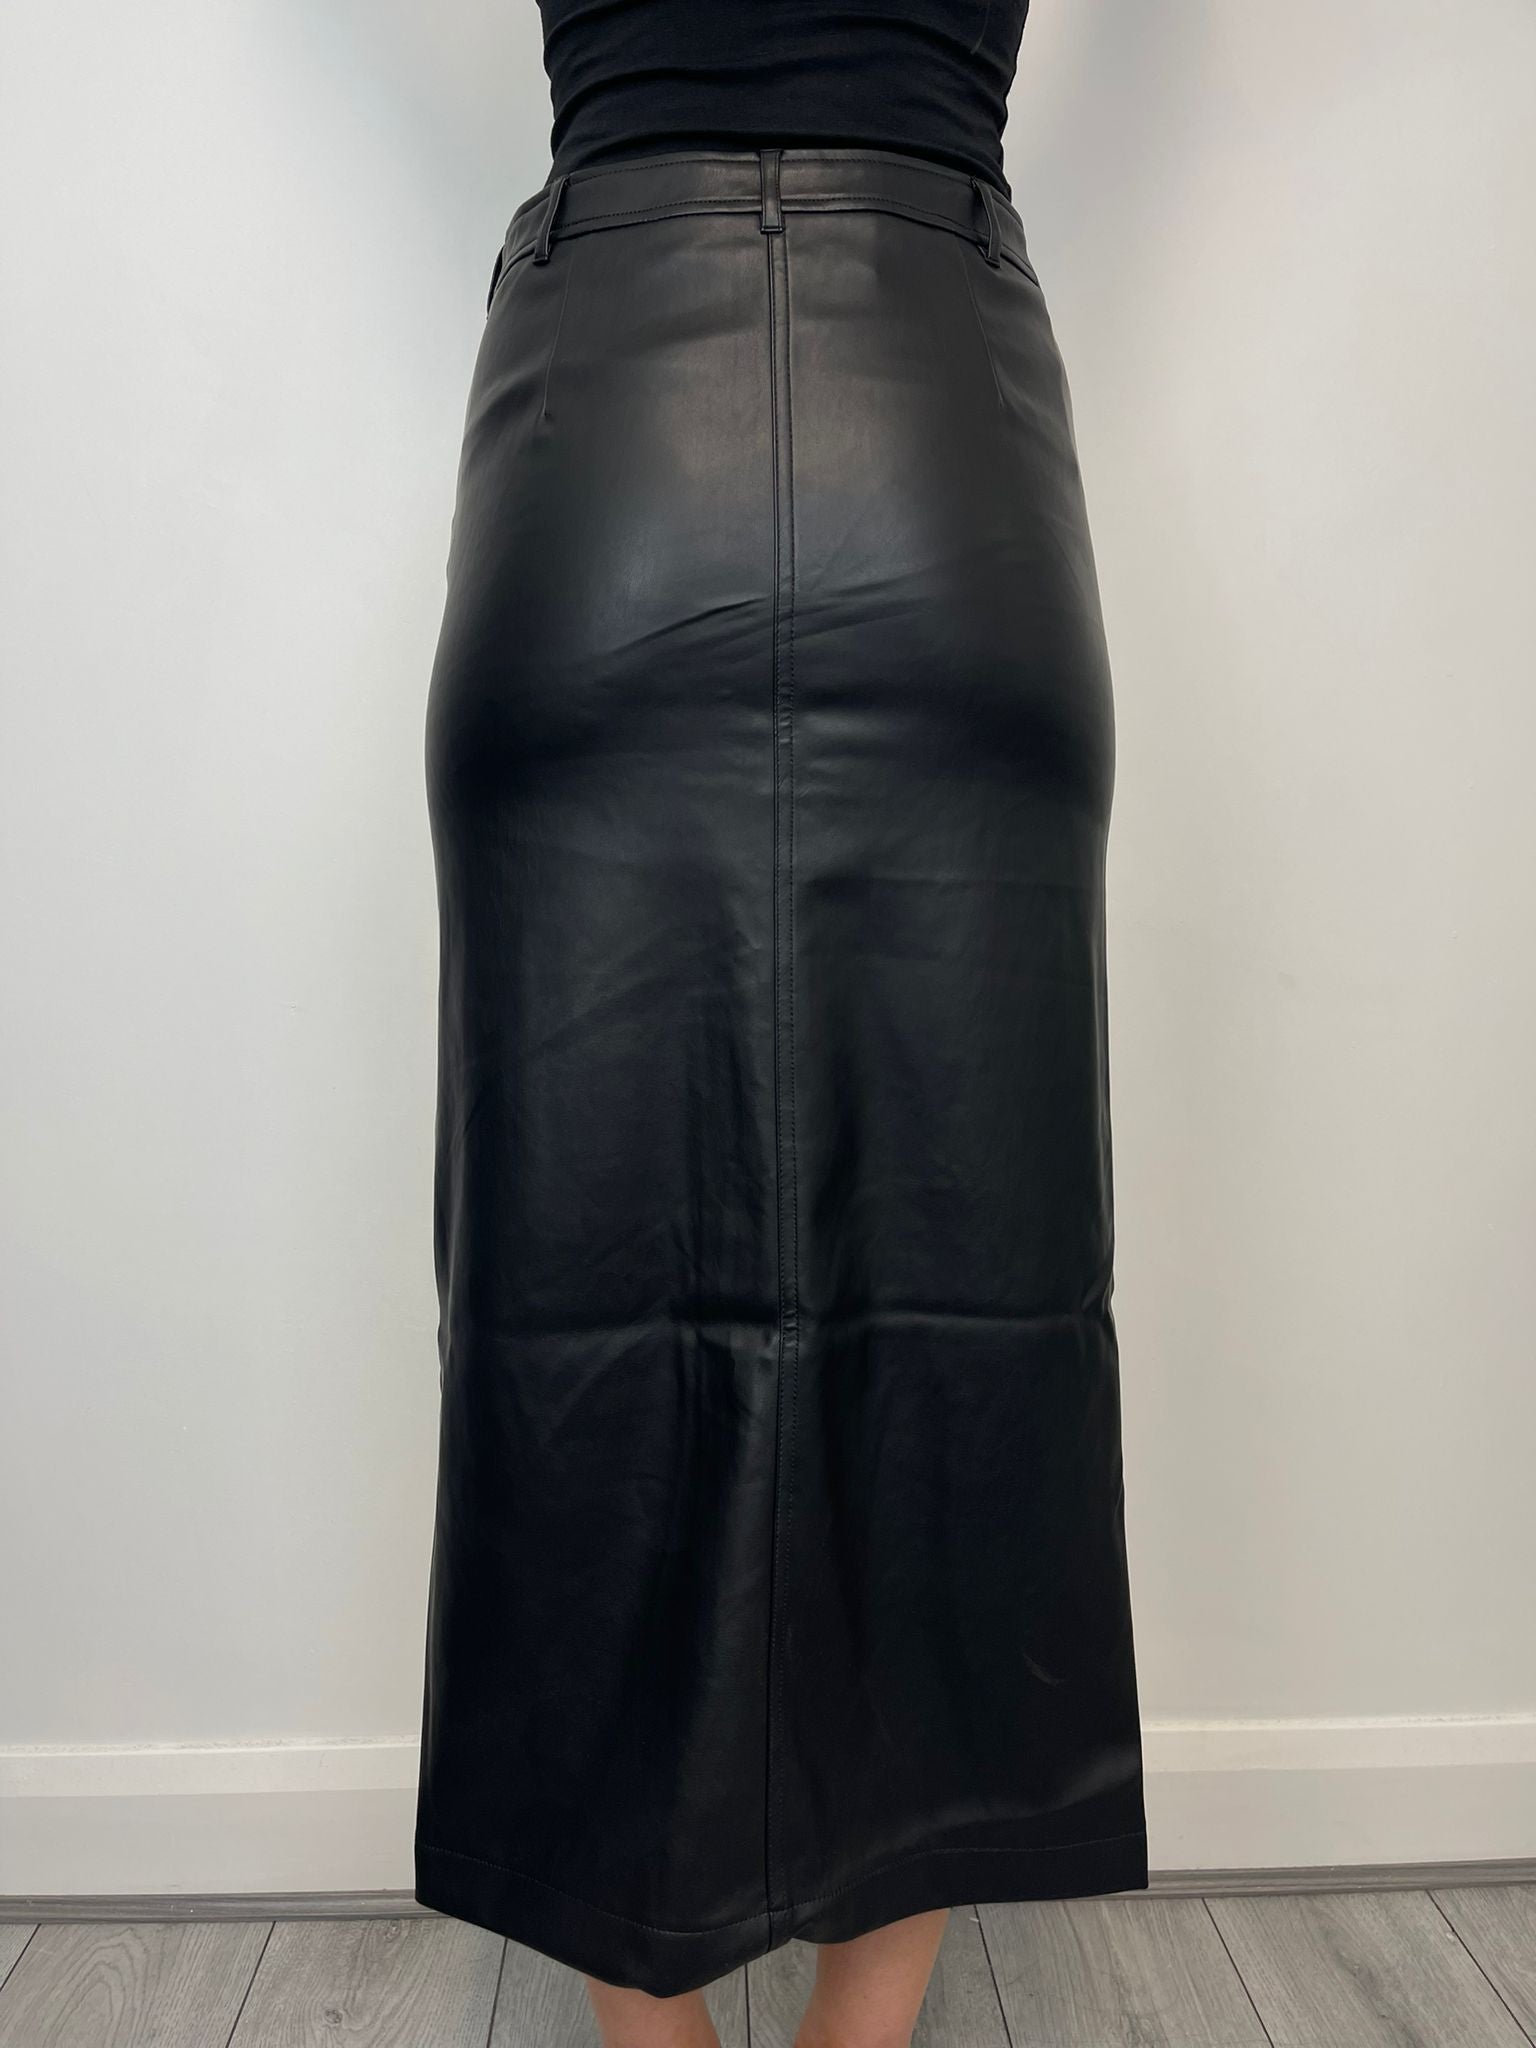 Colina High Waist Faux Leather Skirt (Black)